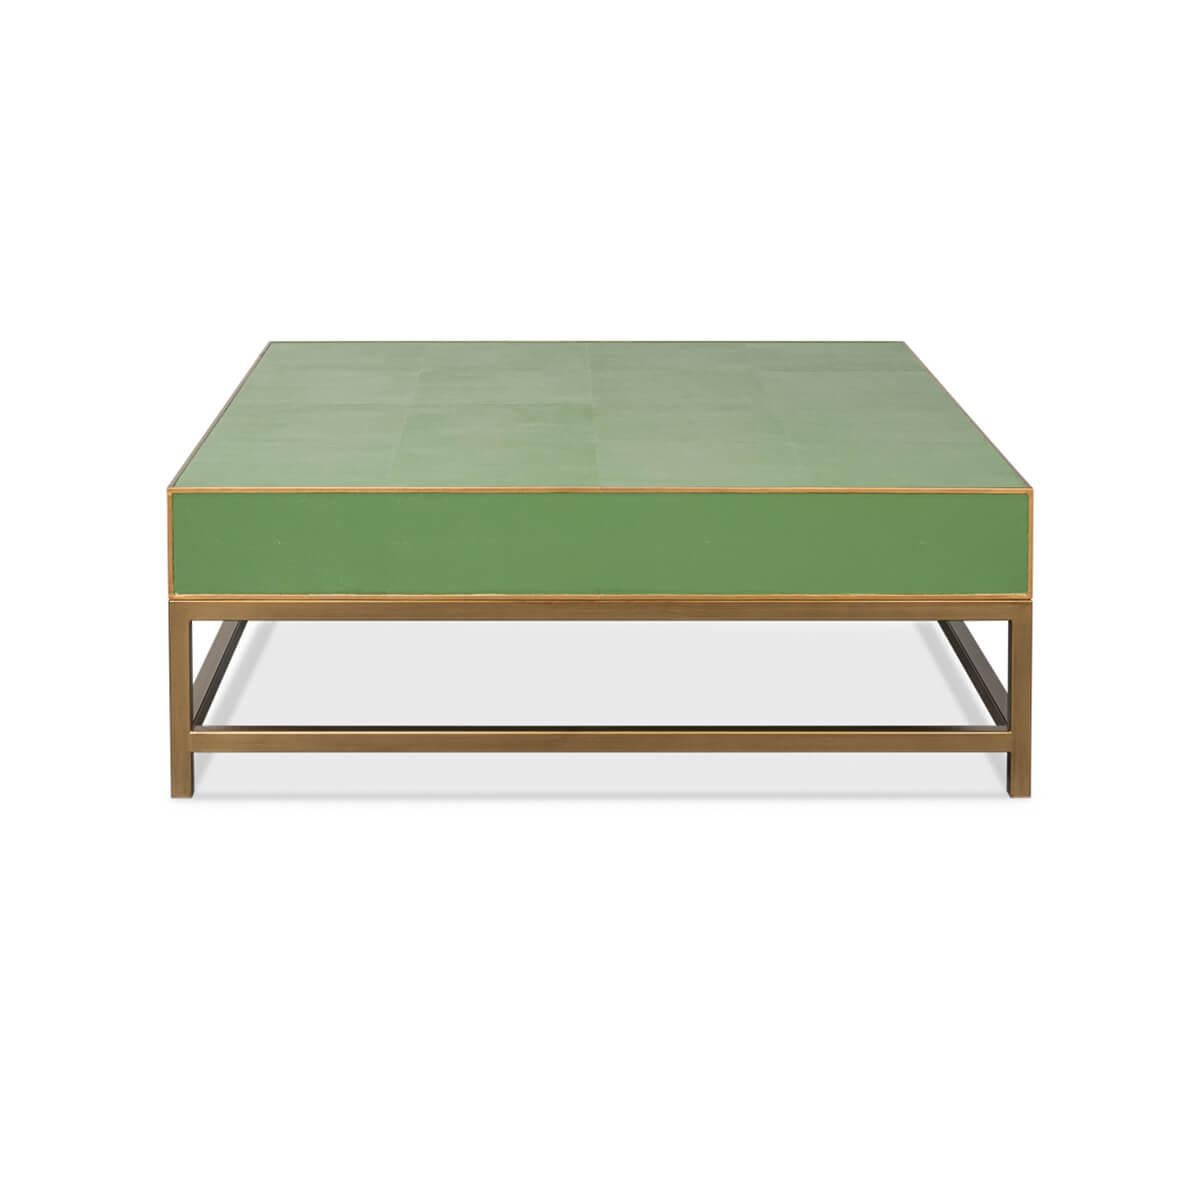 Art Deco Leather Coffee Table in Watercress Green For Sale 2